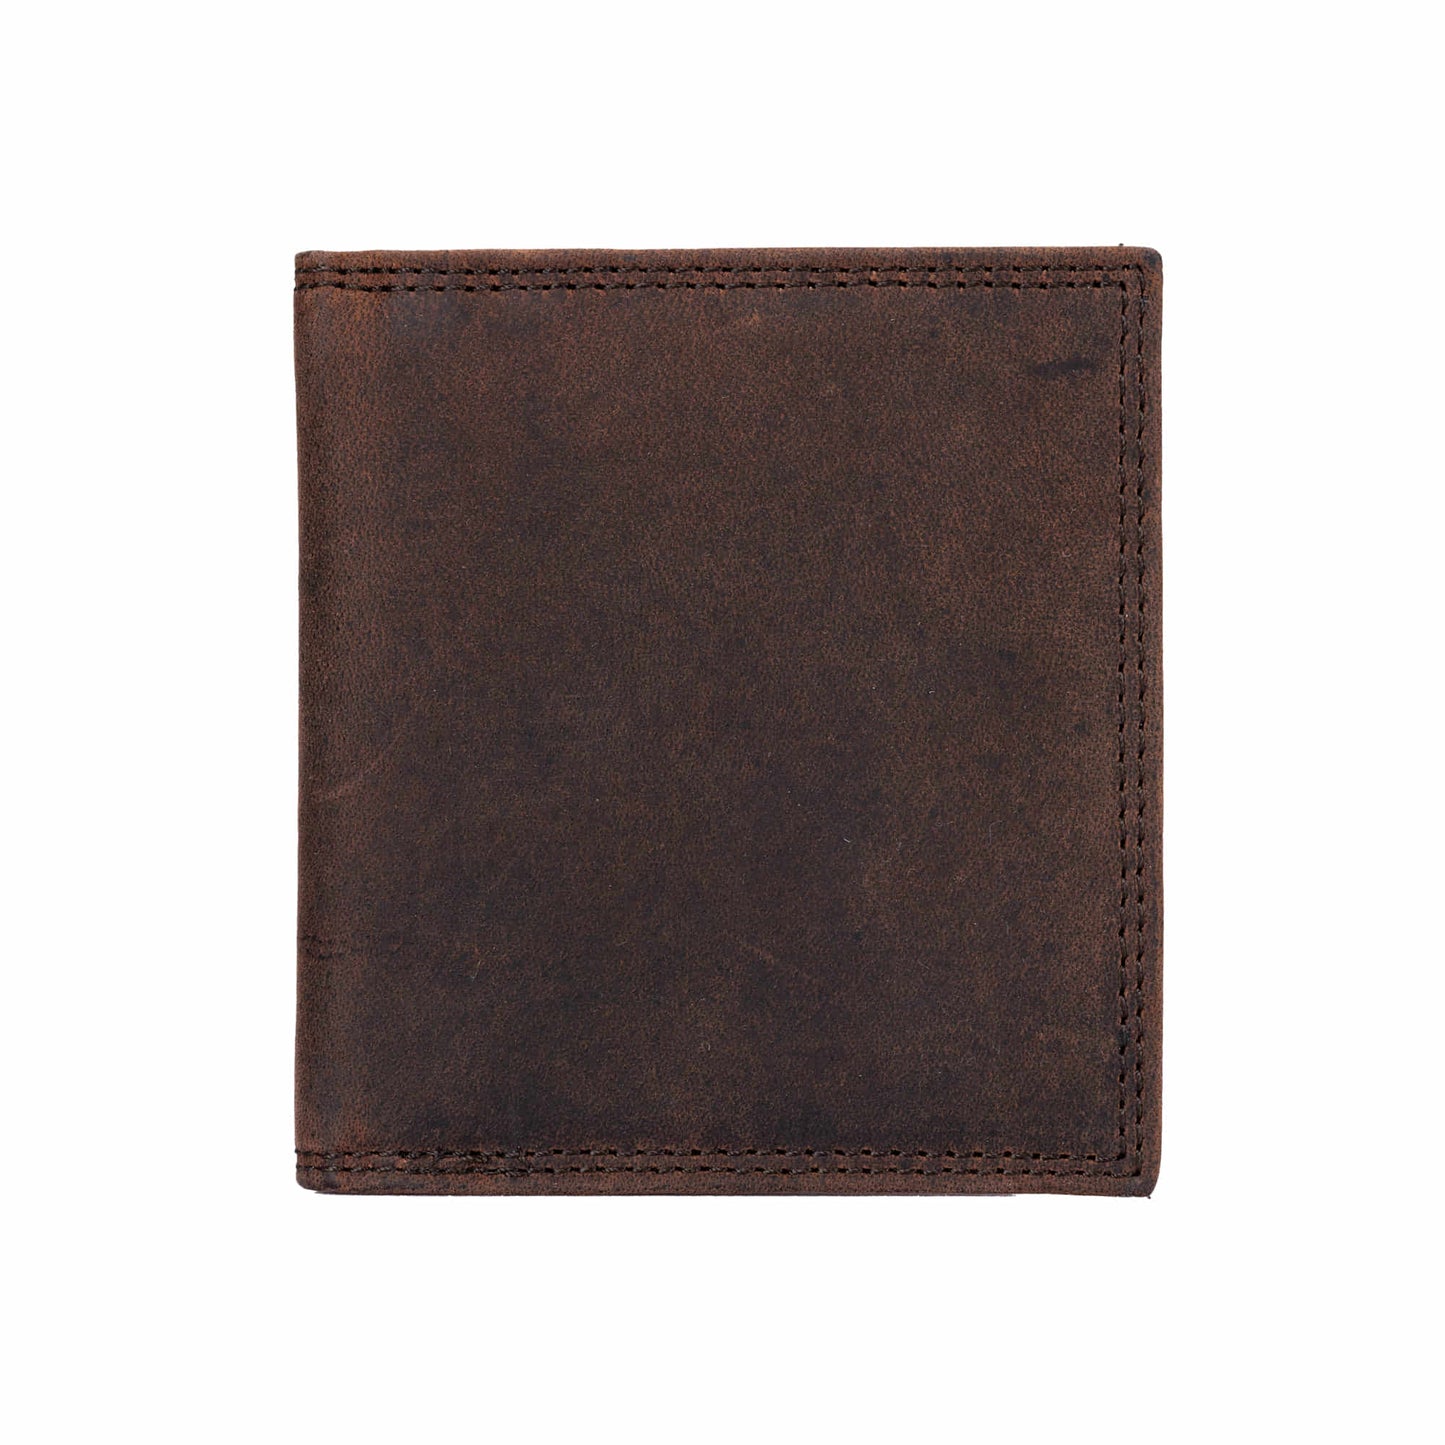 Style n Craft 300703-BR Credit Card / Business Card Case in Brown Leather with Vintage like 2 Tone Effect & Double Stitching on the outside. It has RFID Protection. Closed Front View